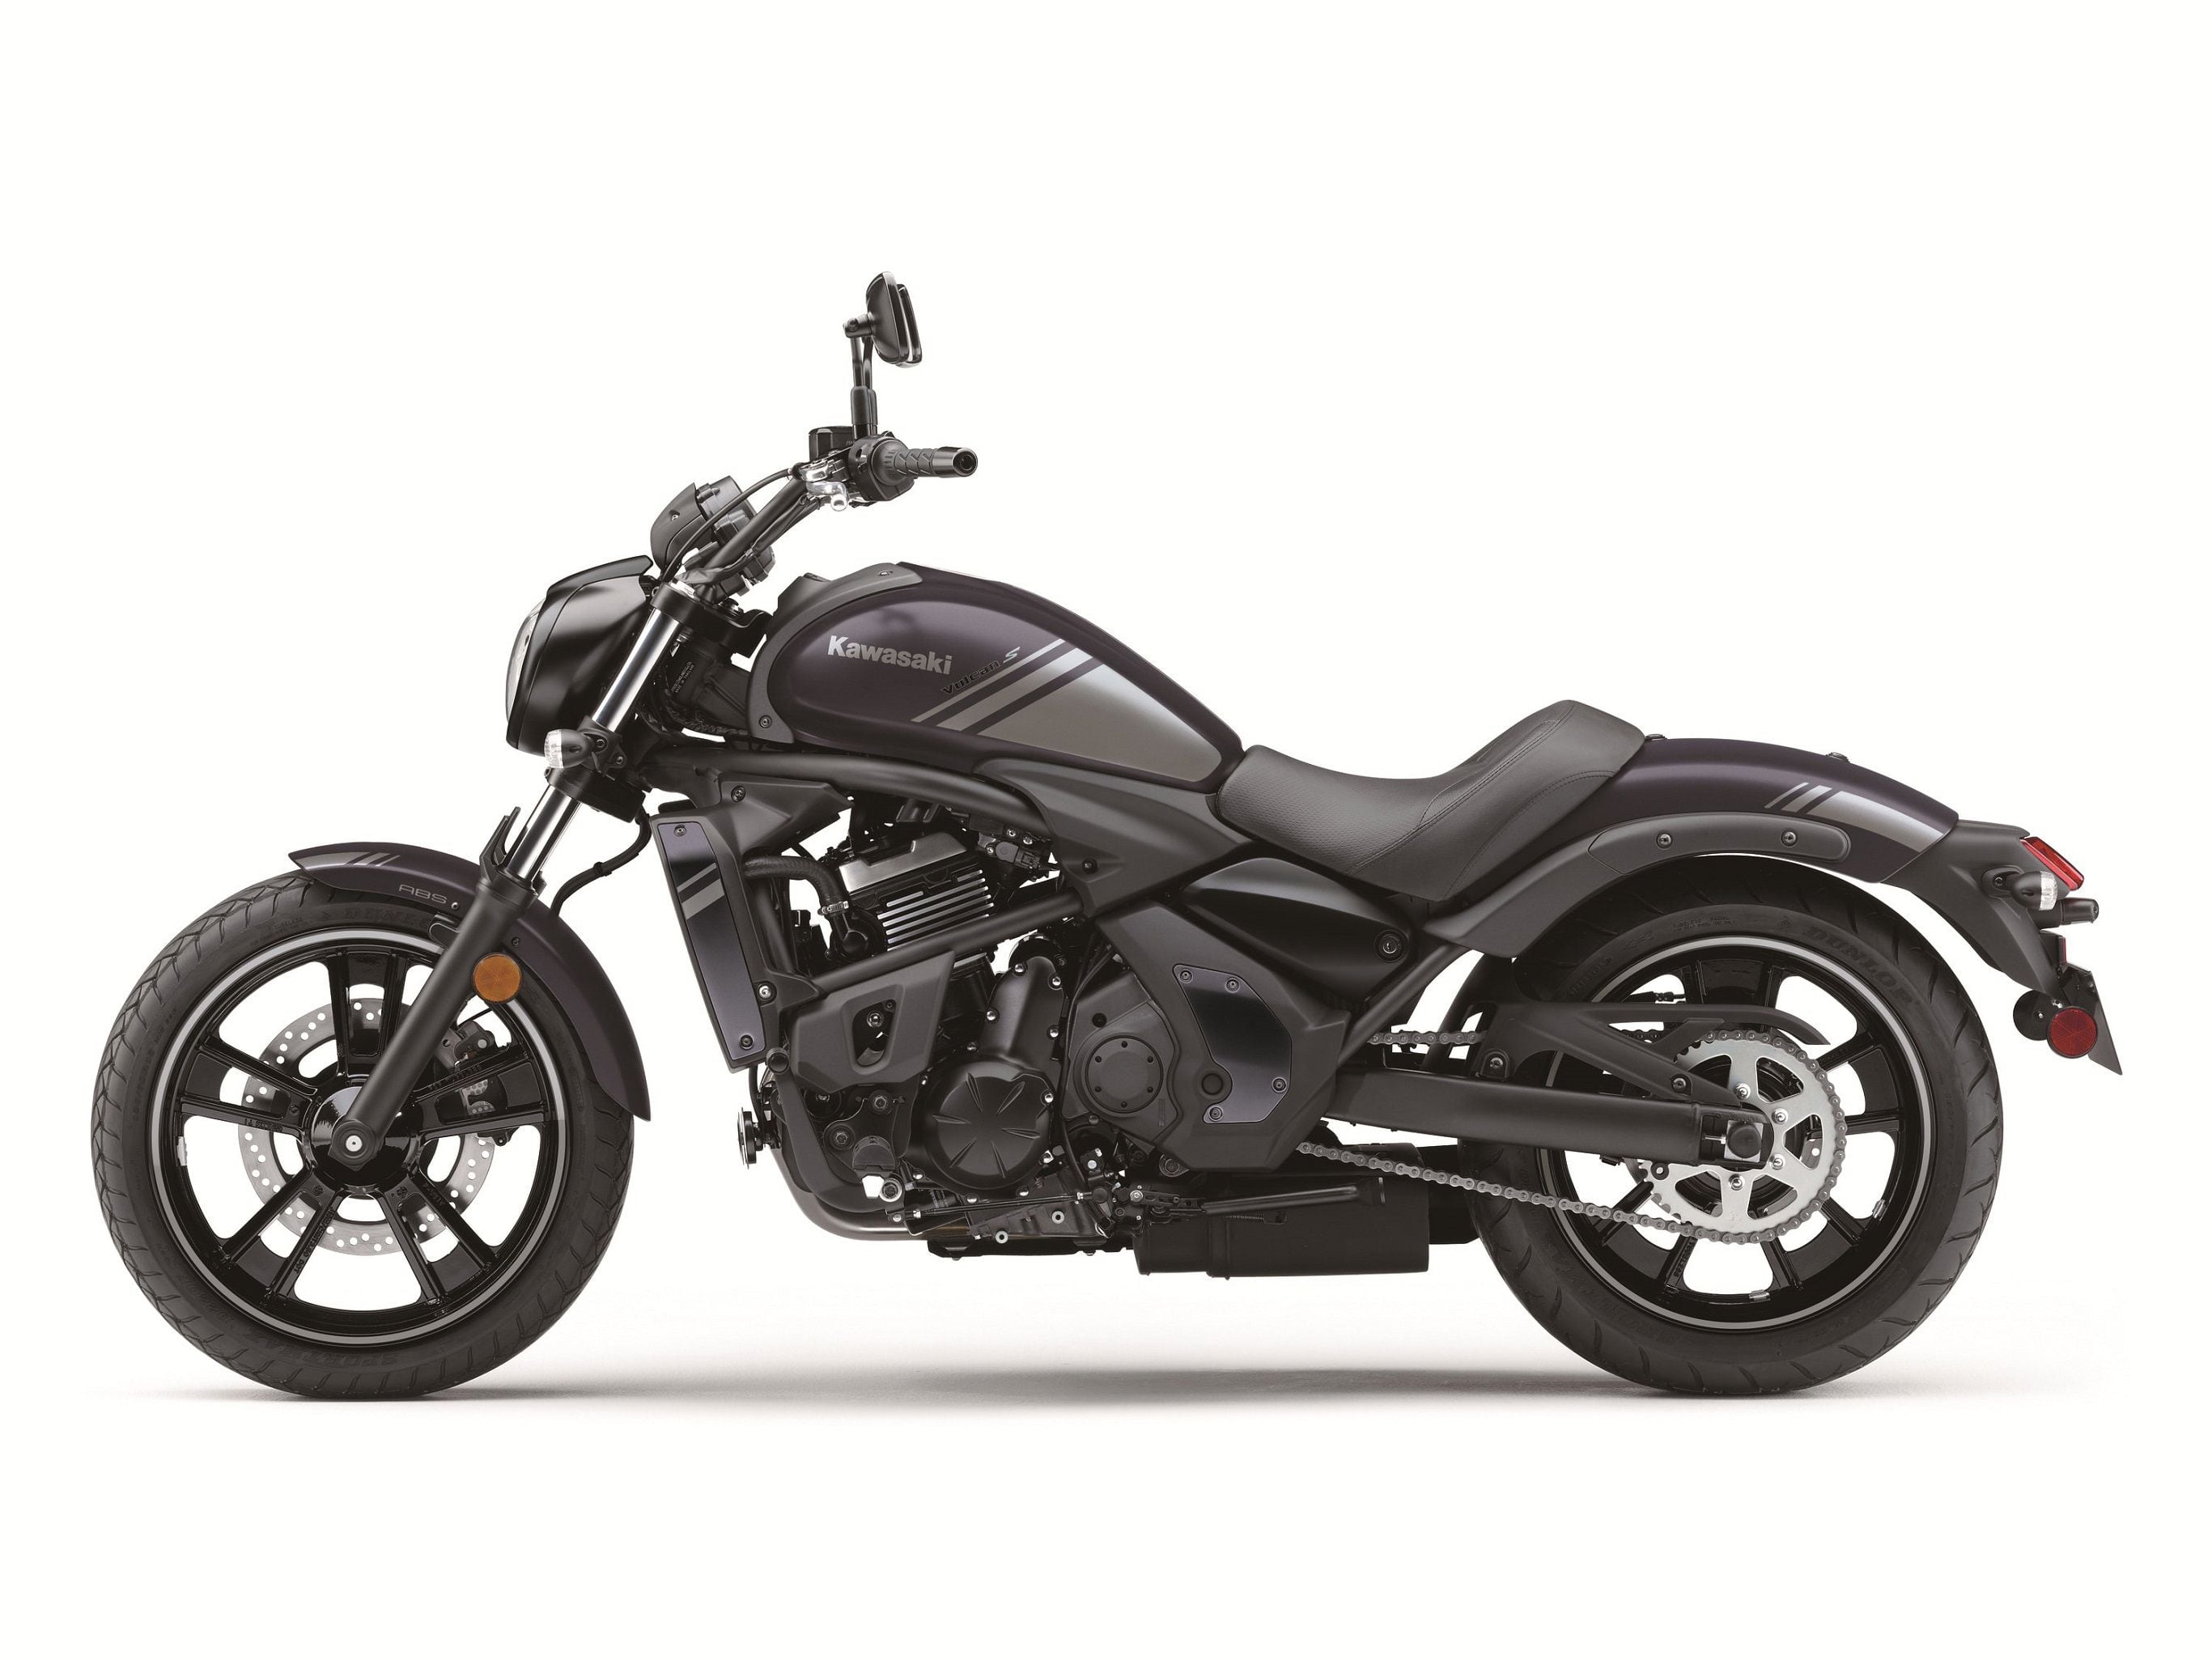 Sygdom analyse forudsigelse 2020 Kawasaki Vulcan S Buyer's Guide: Specs, Photos, Price | Cycle World